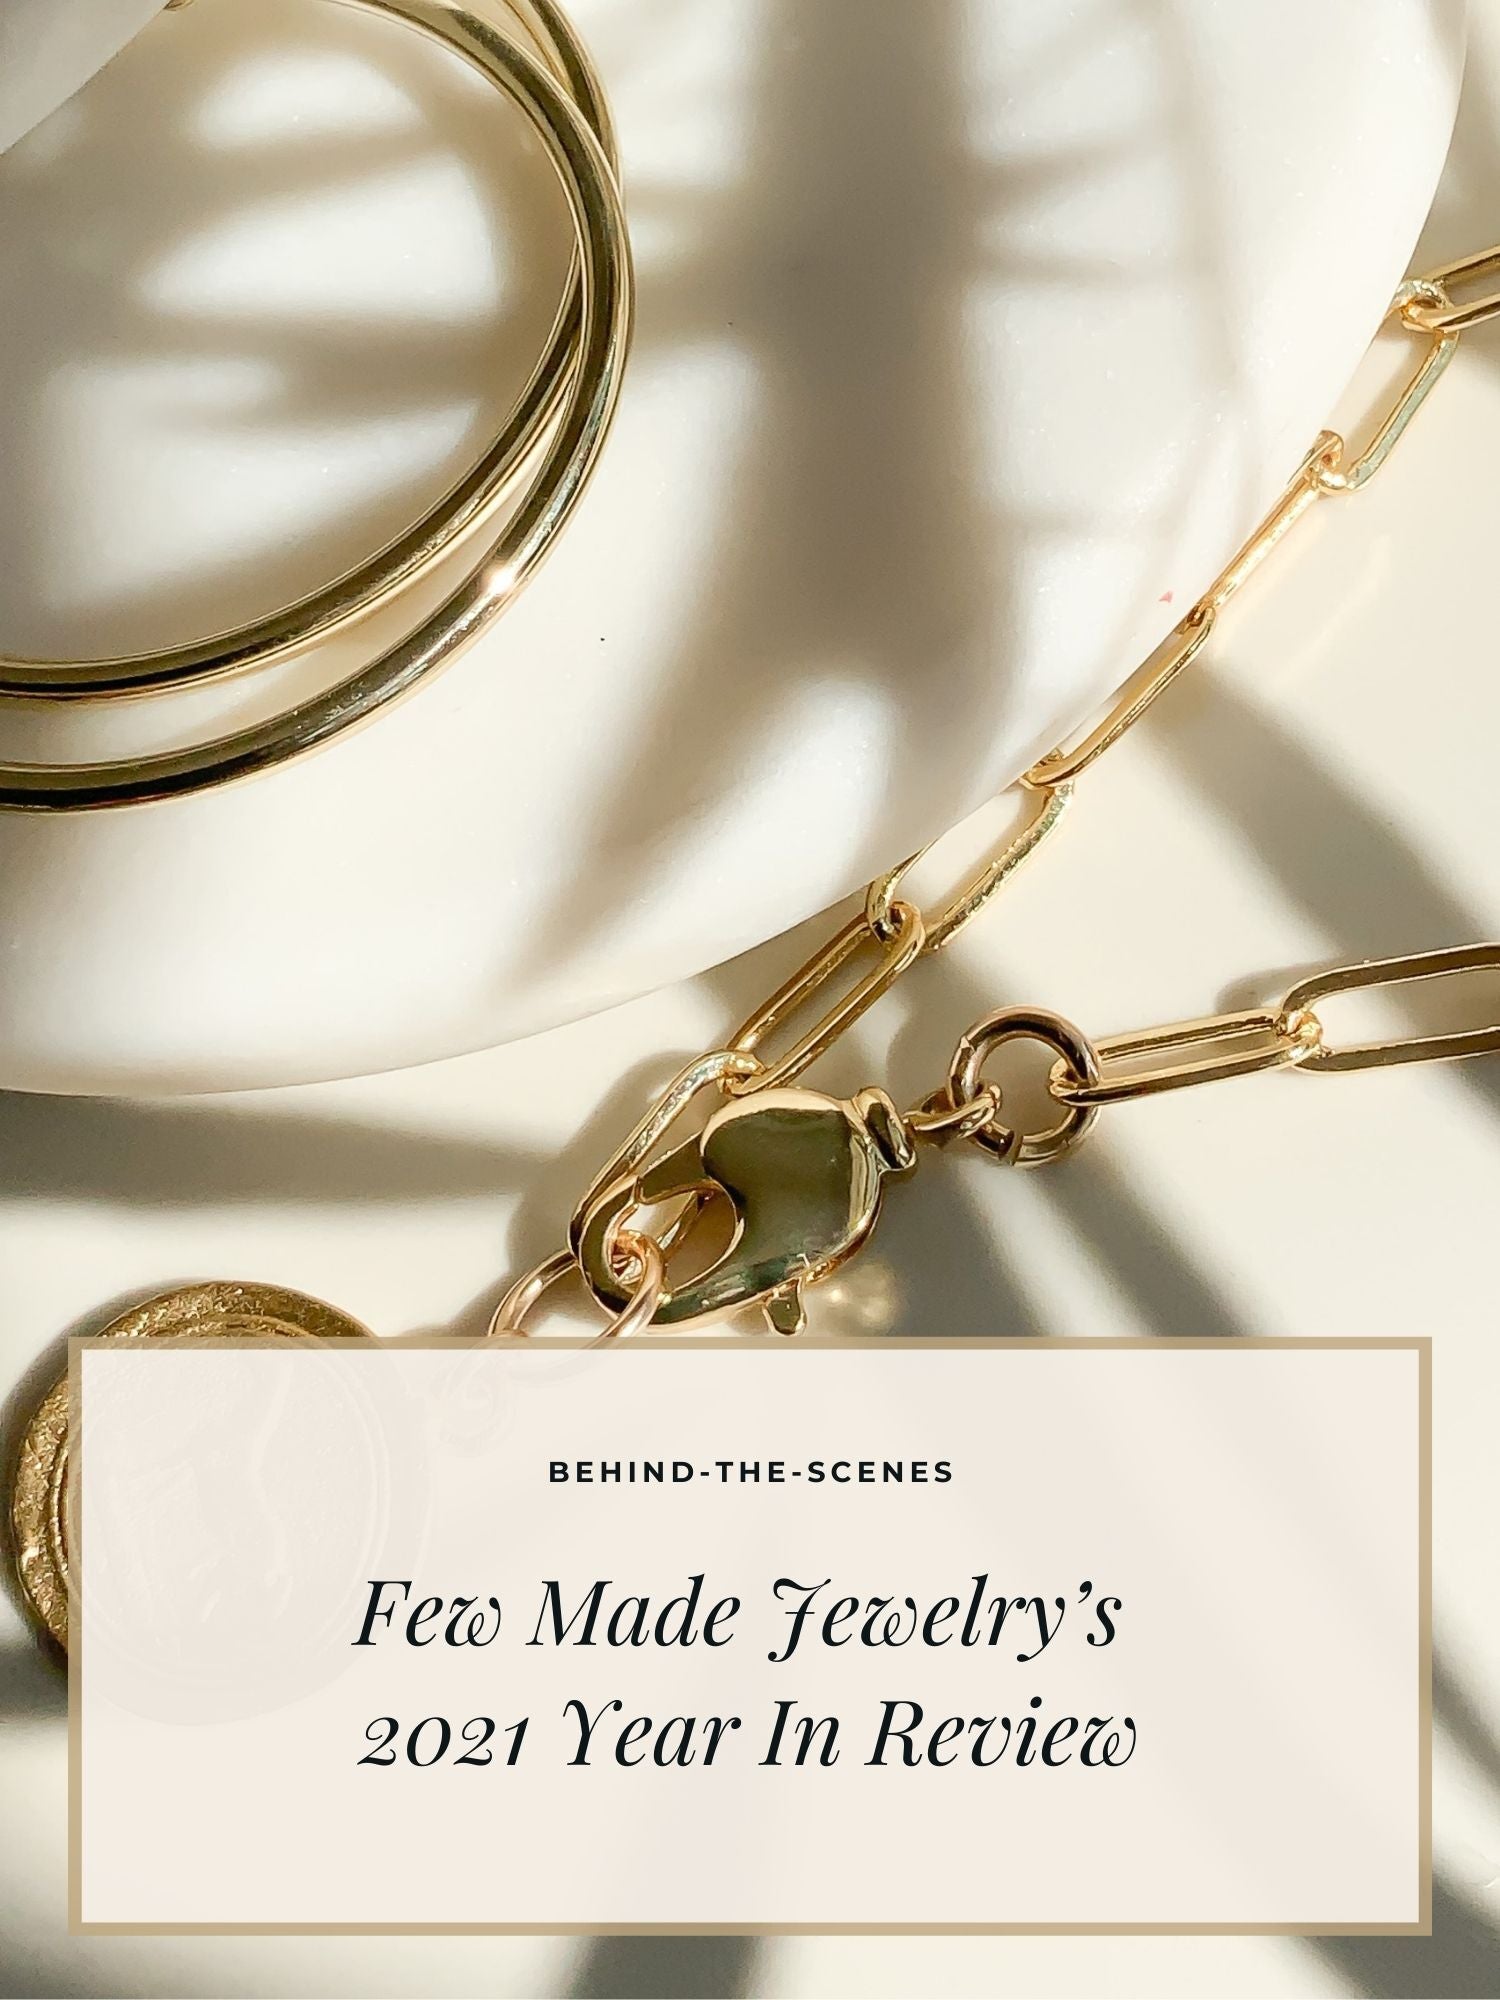 Few Made Jewelry’s 2021 Year In Review